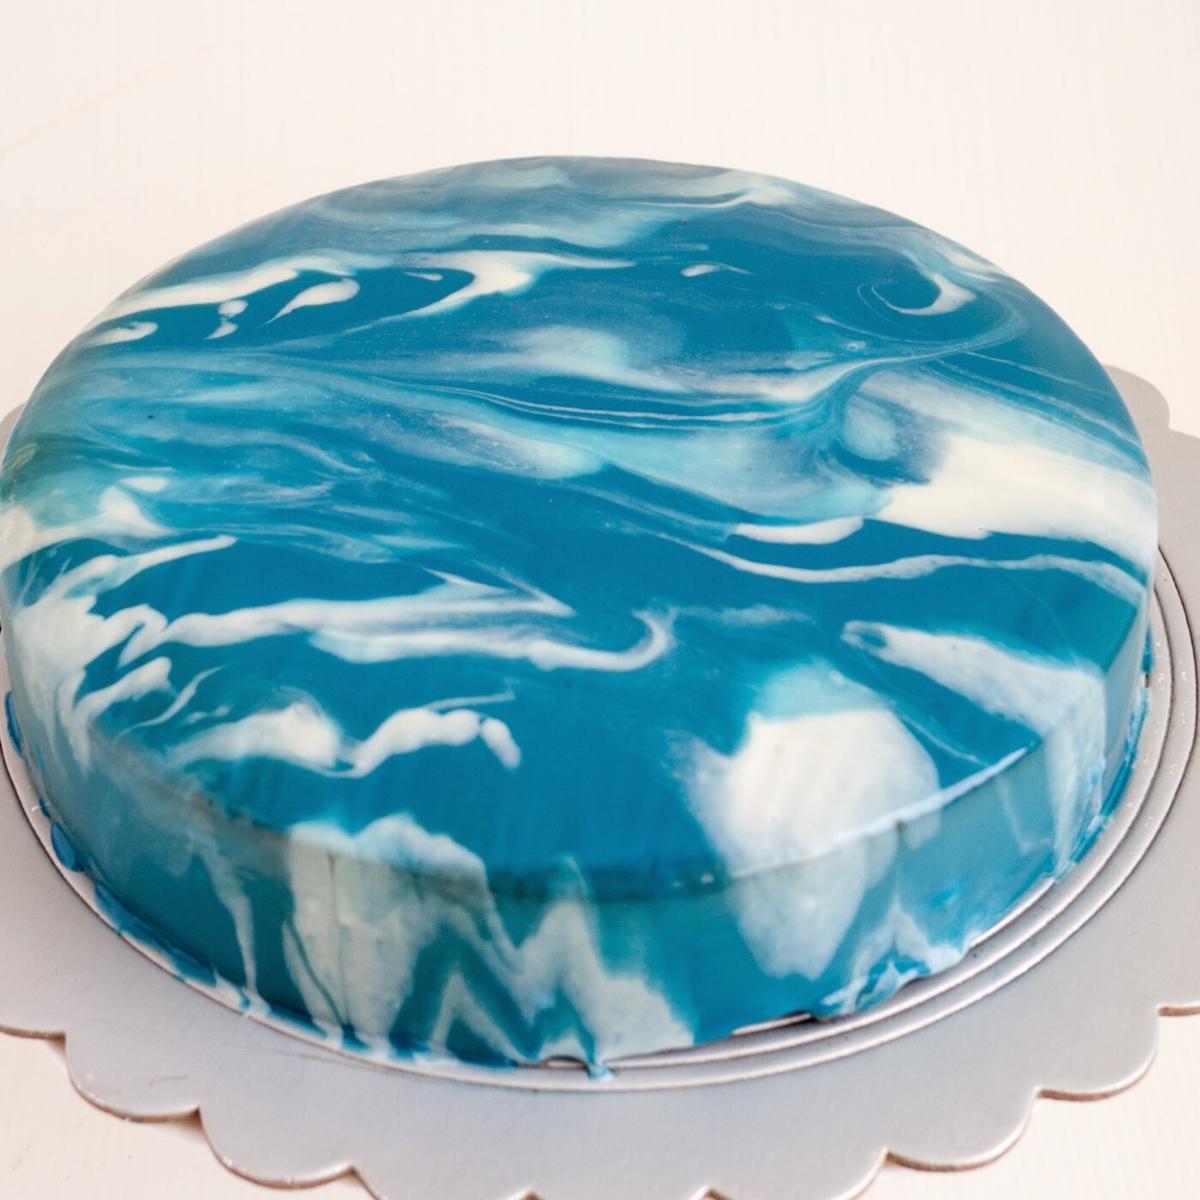 Cut chocolate mousse cake with mirror glaze.